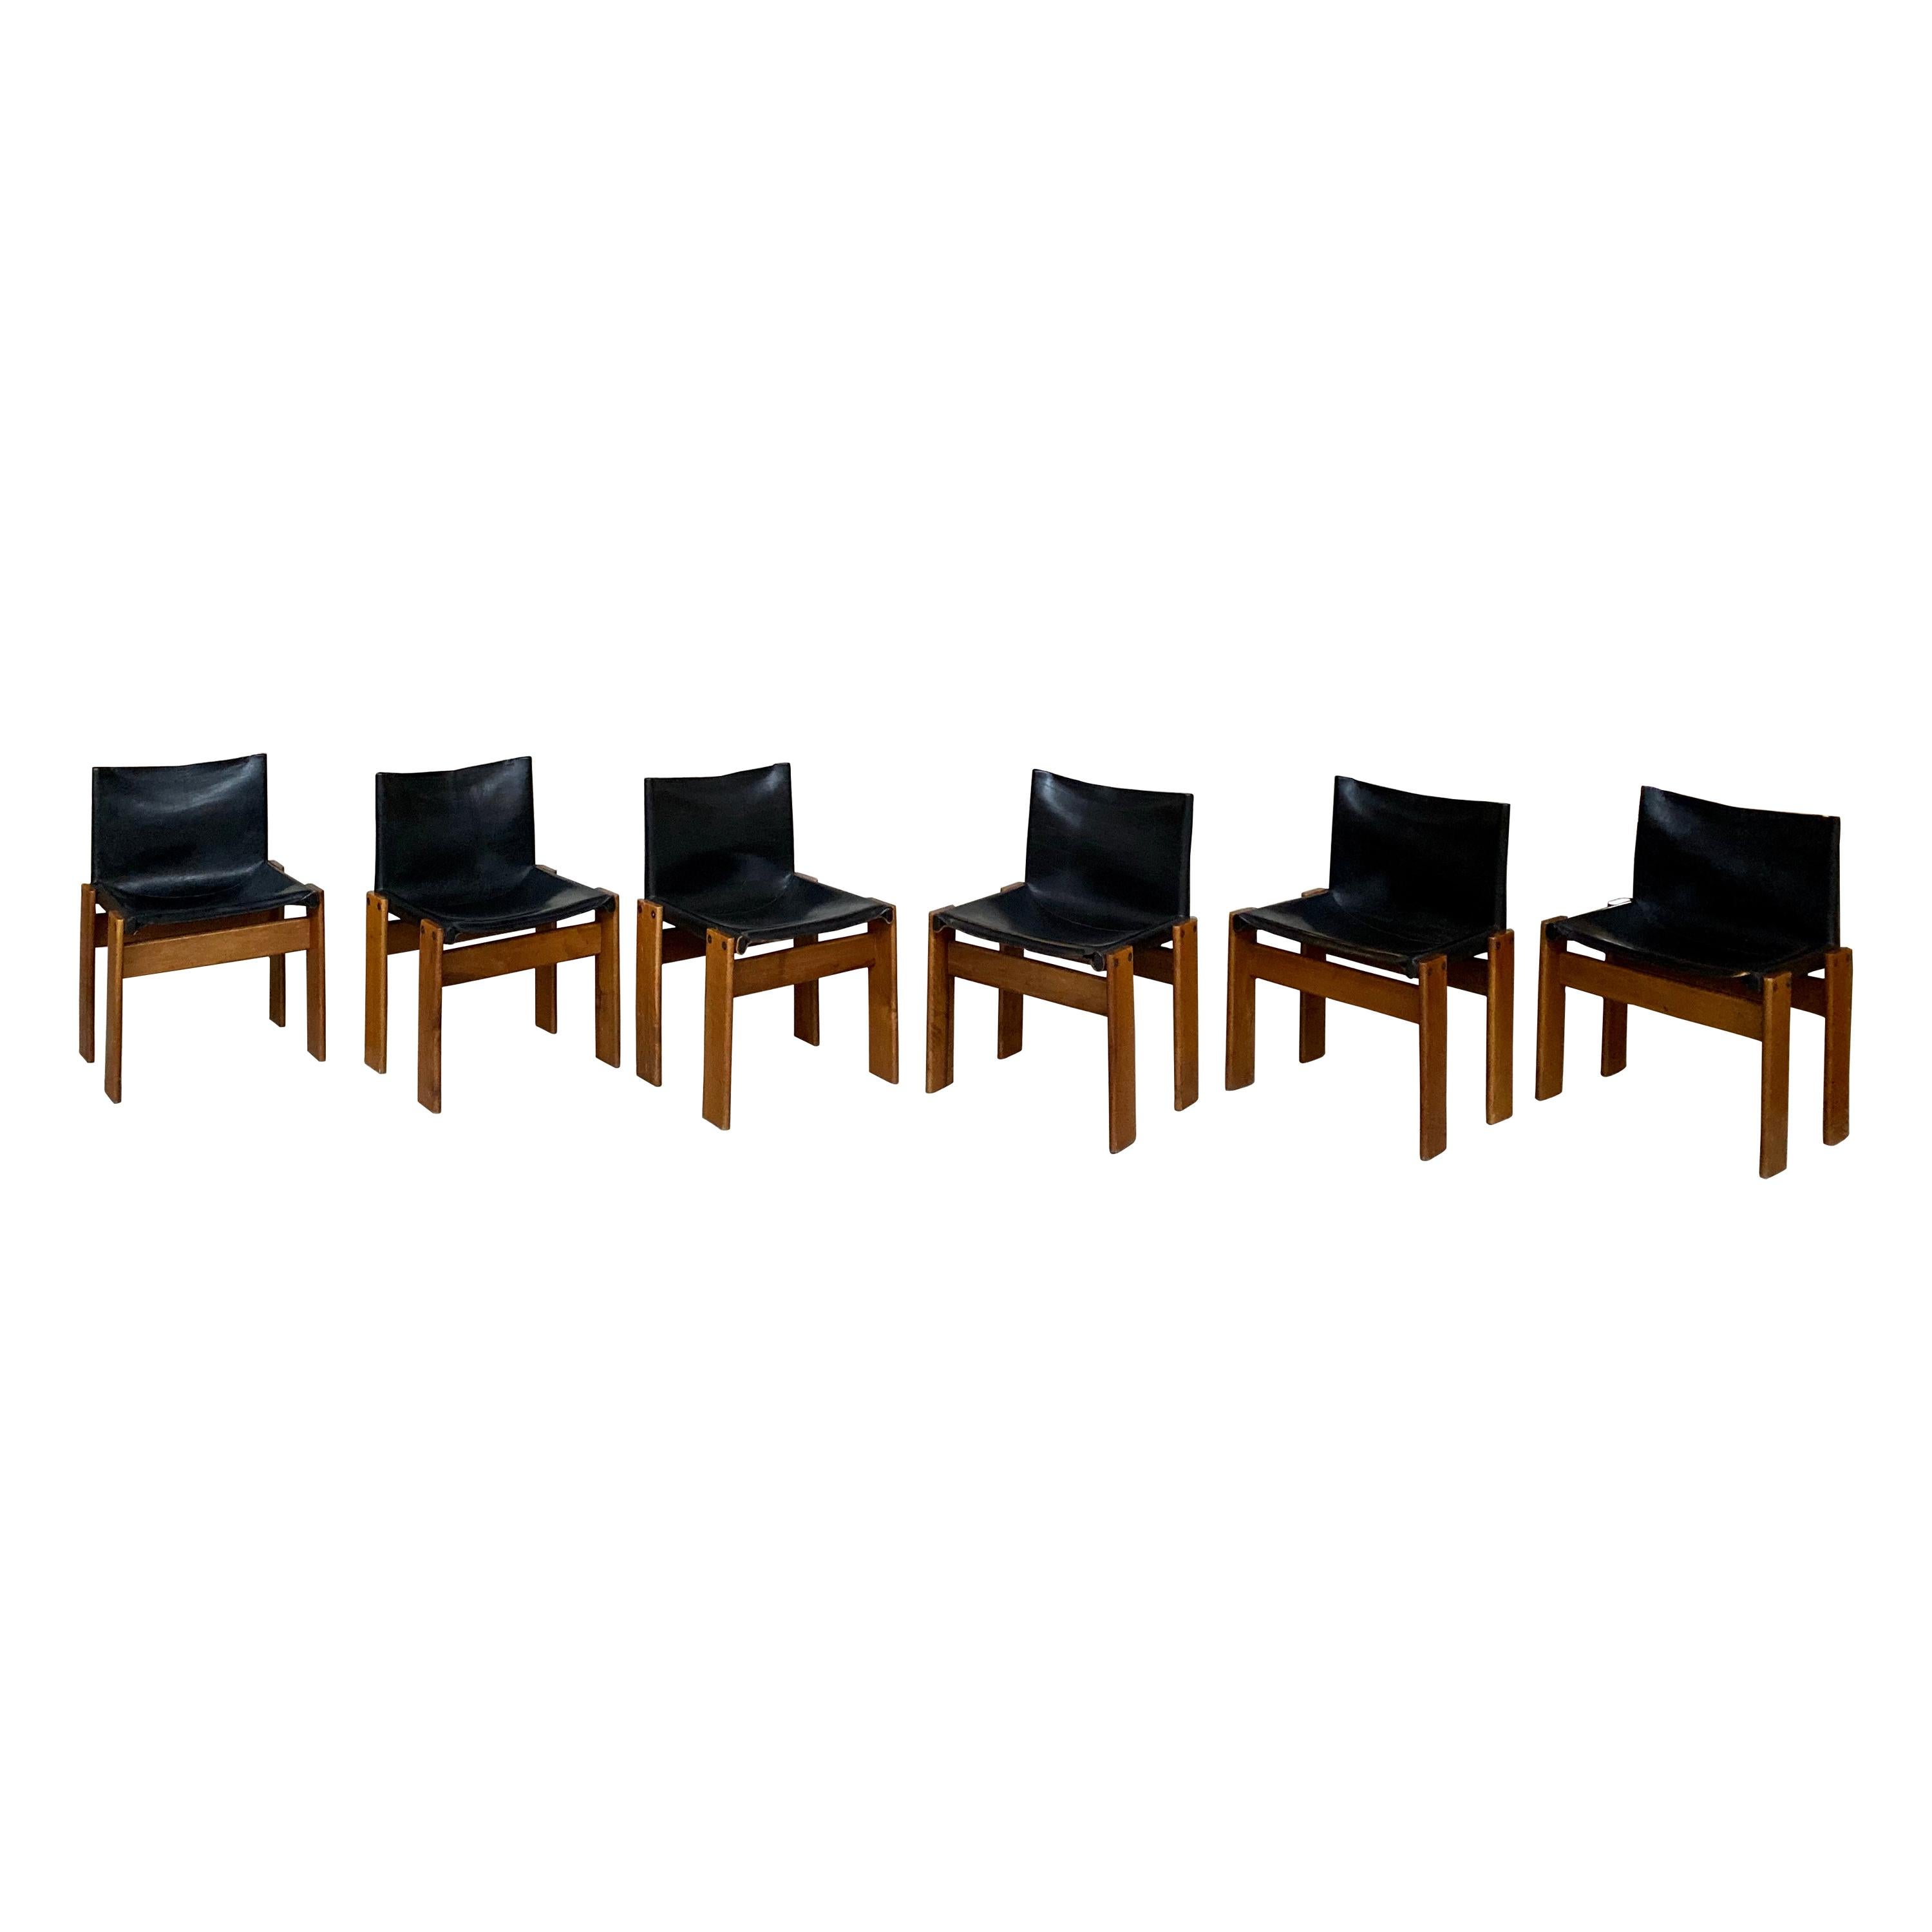 Afra & Tobia Scarpa “Monk” Dining Chairs for Molteni, 1973, Set of 6